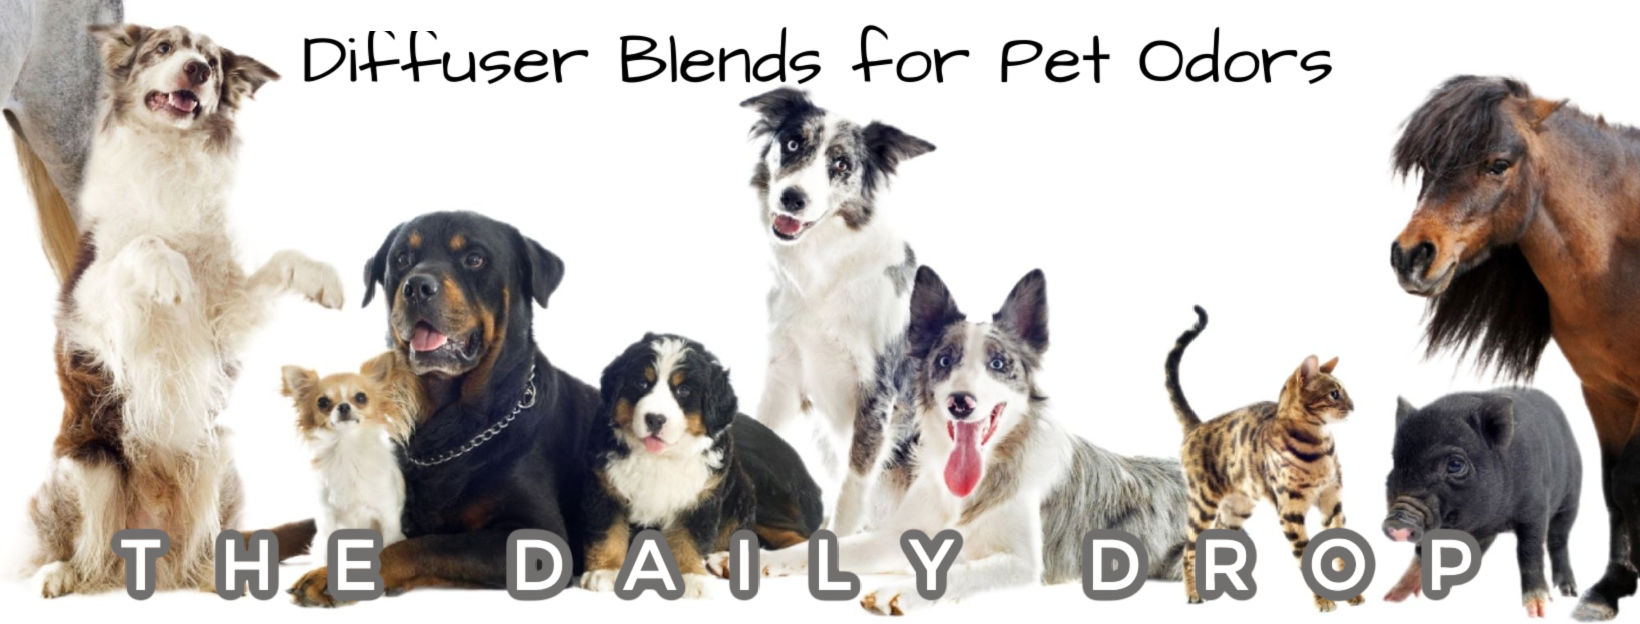 Diffuser Blends for Pet Odors | From Sandy